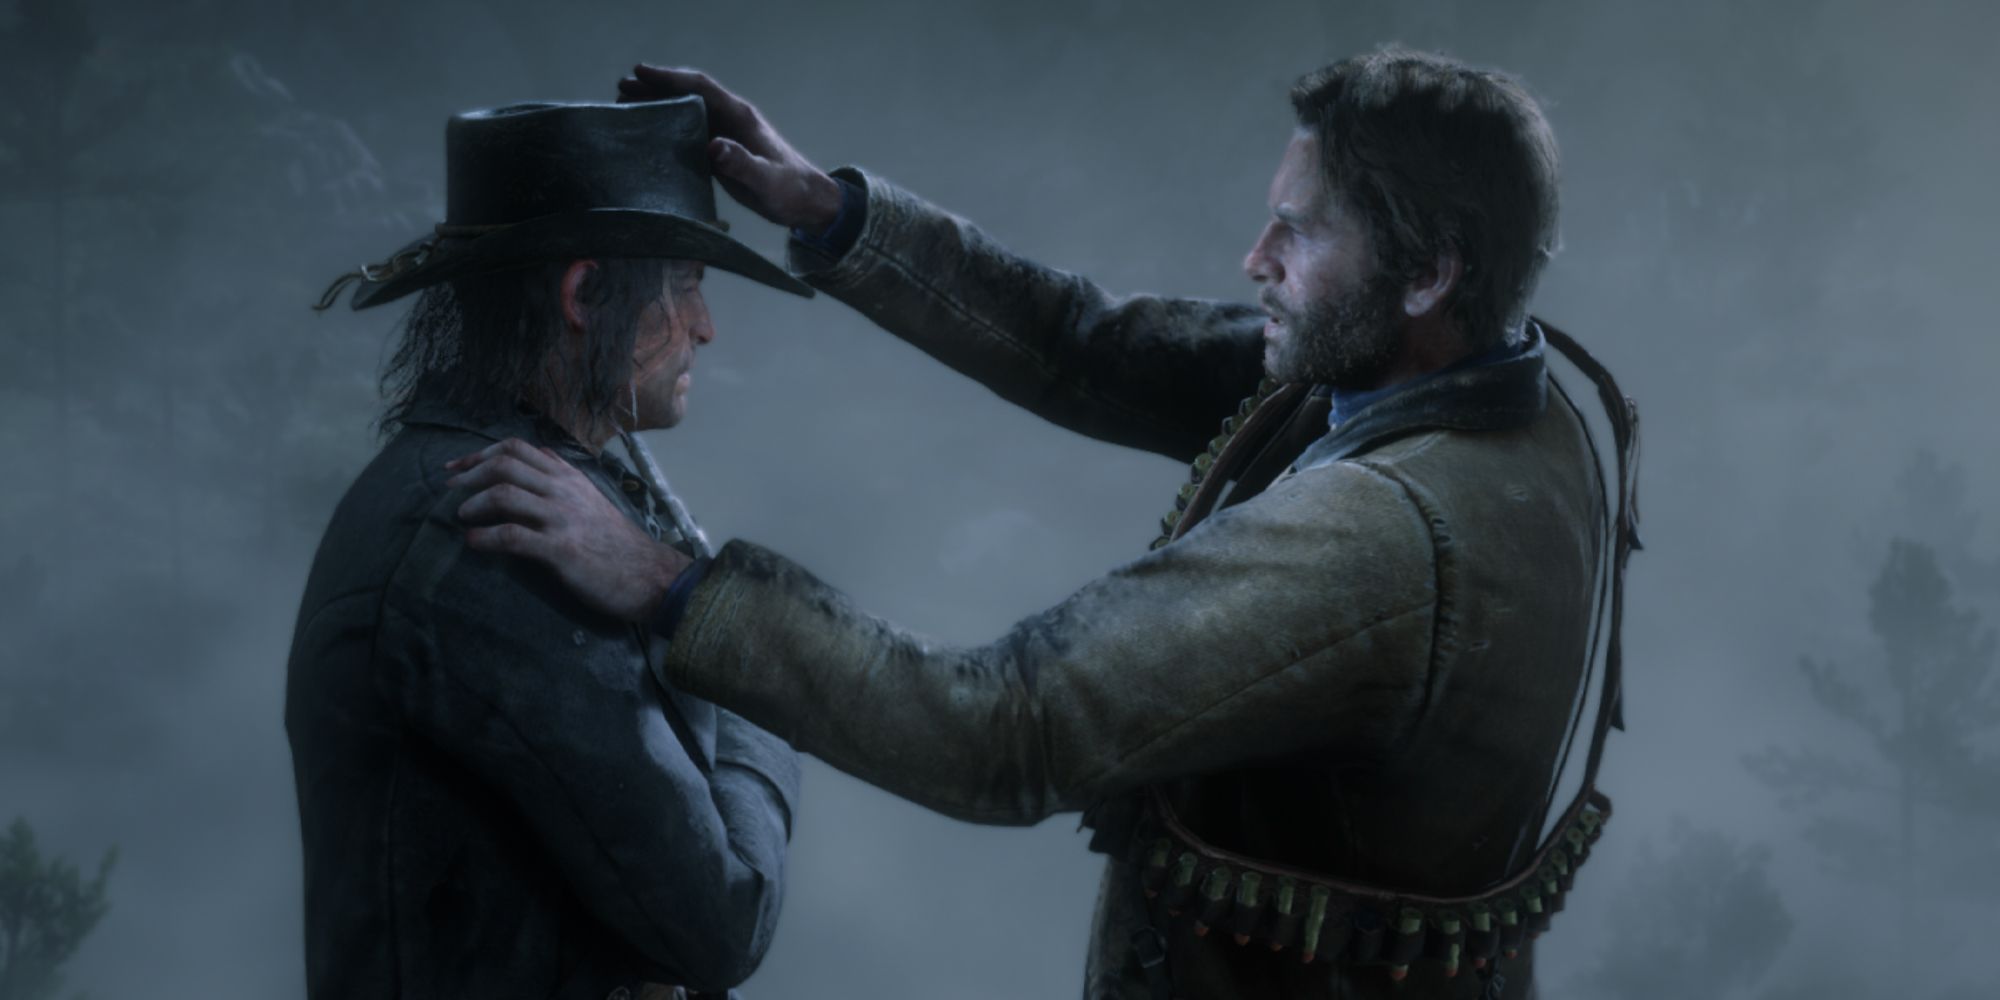 The full timeline of Red Dead Redemption and RDR2 across Arthur Morgan and John Marston and Jack Marston